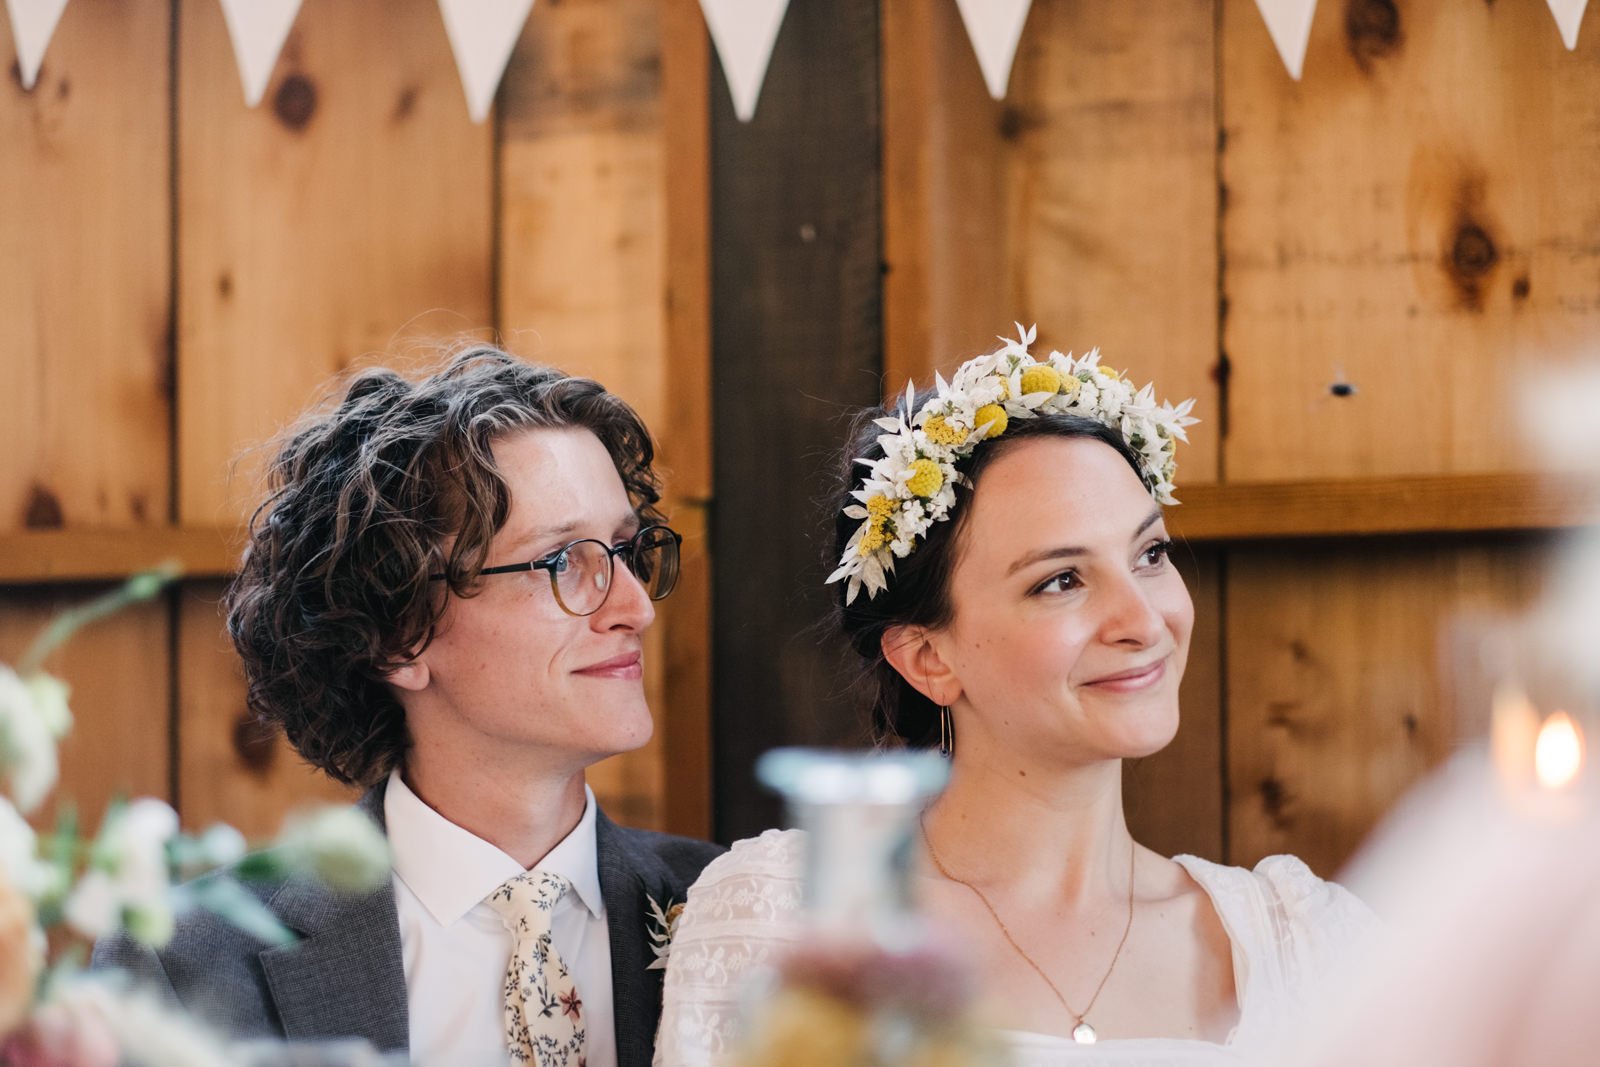  Bride and groom smile listening to toasts wearing flower crown 